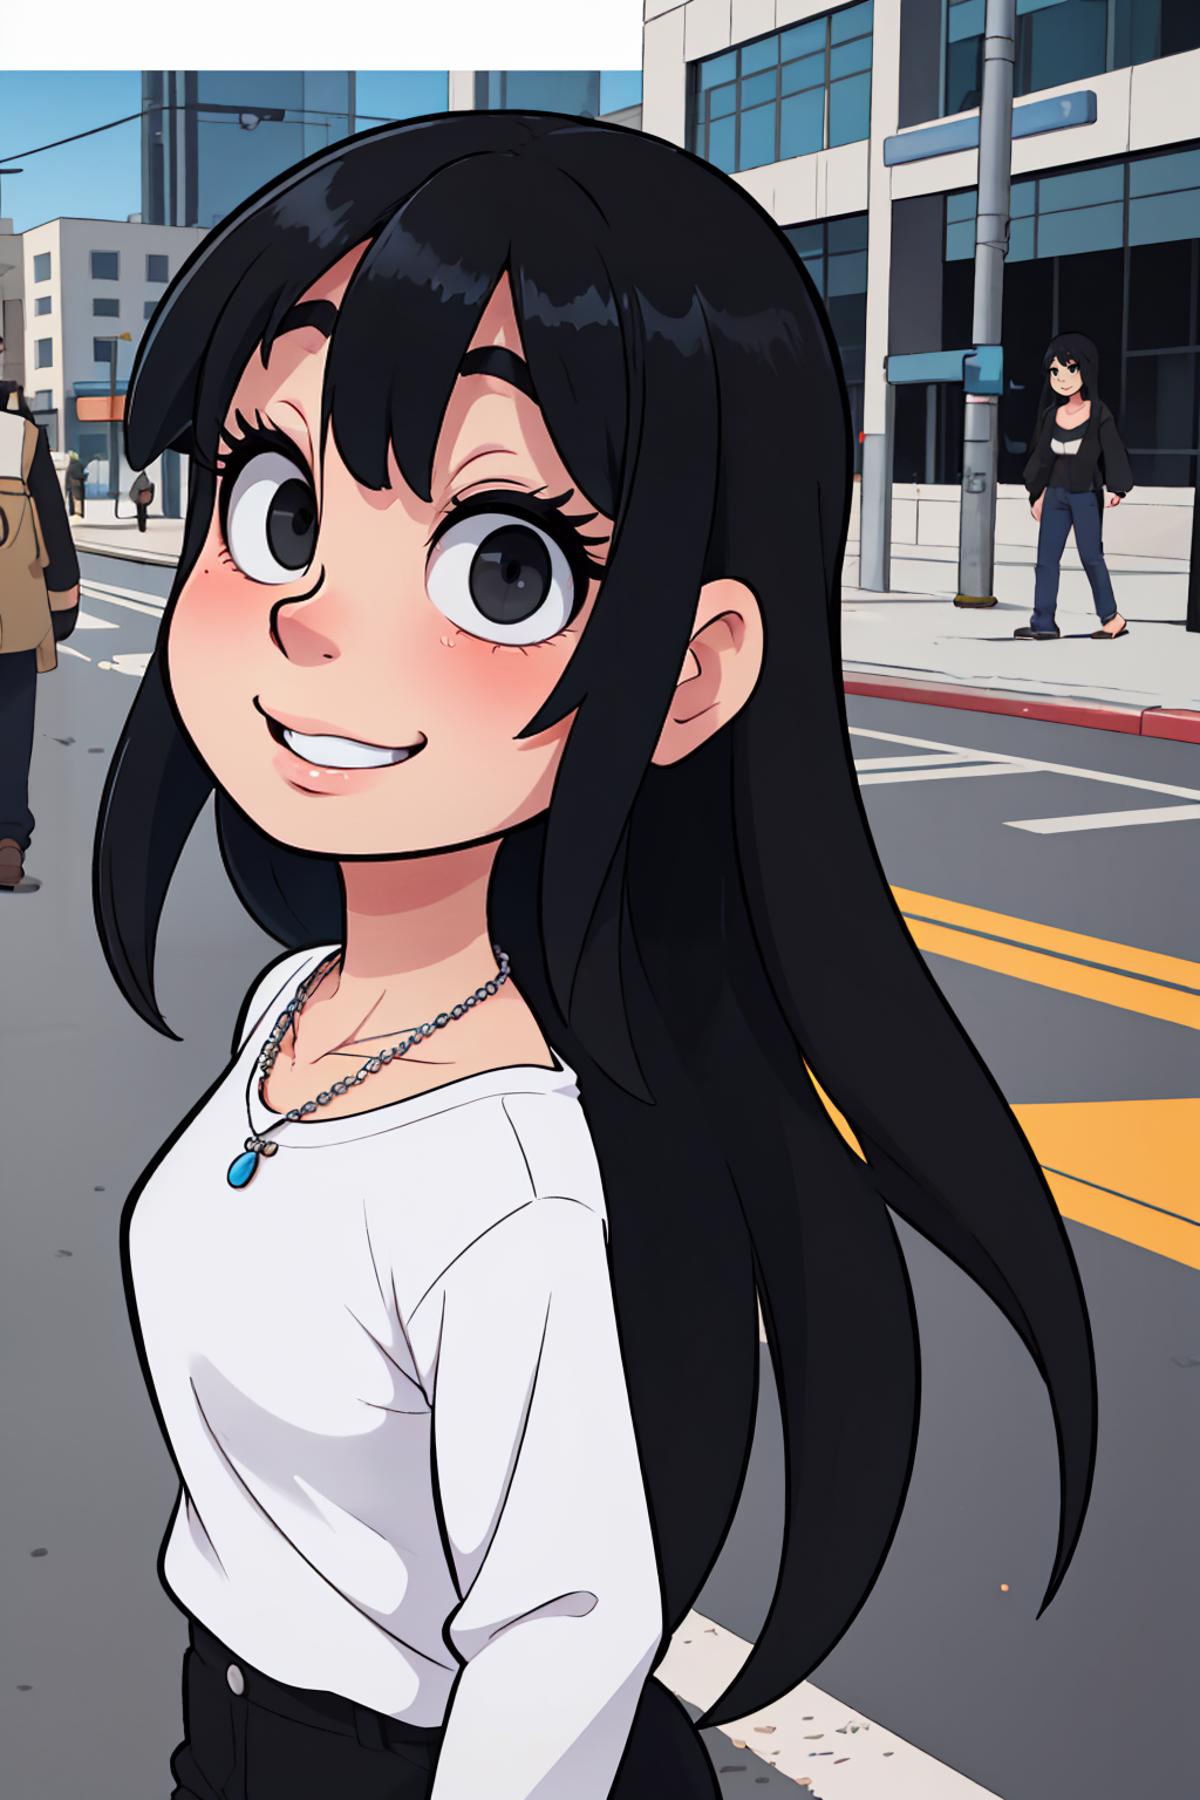 A smiling girl with long black hair and a white shirt.